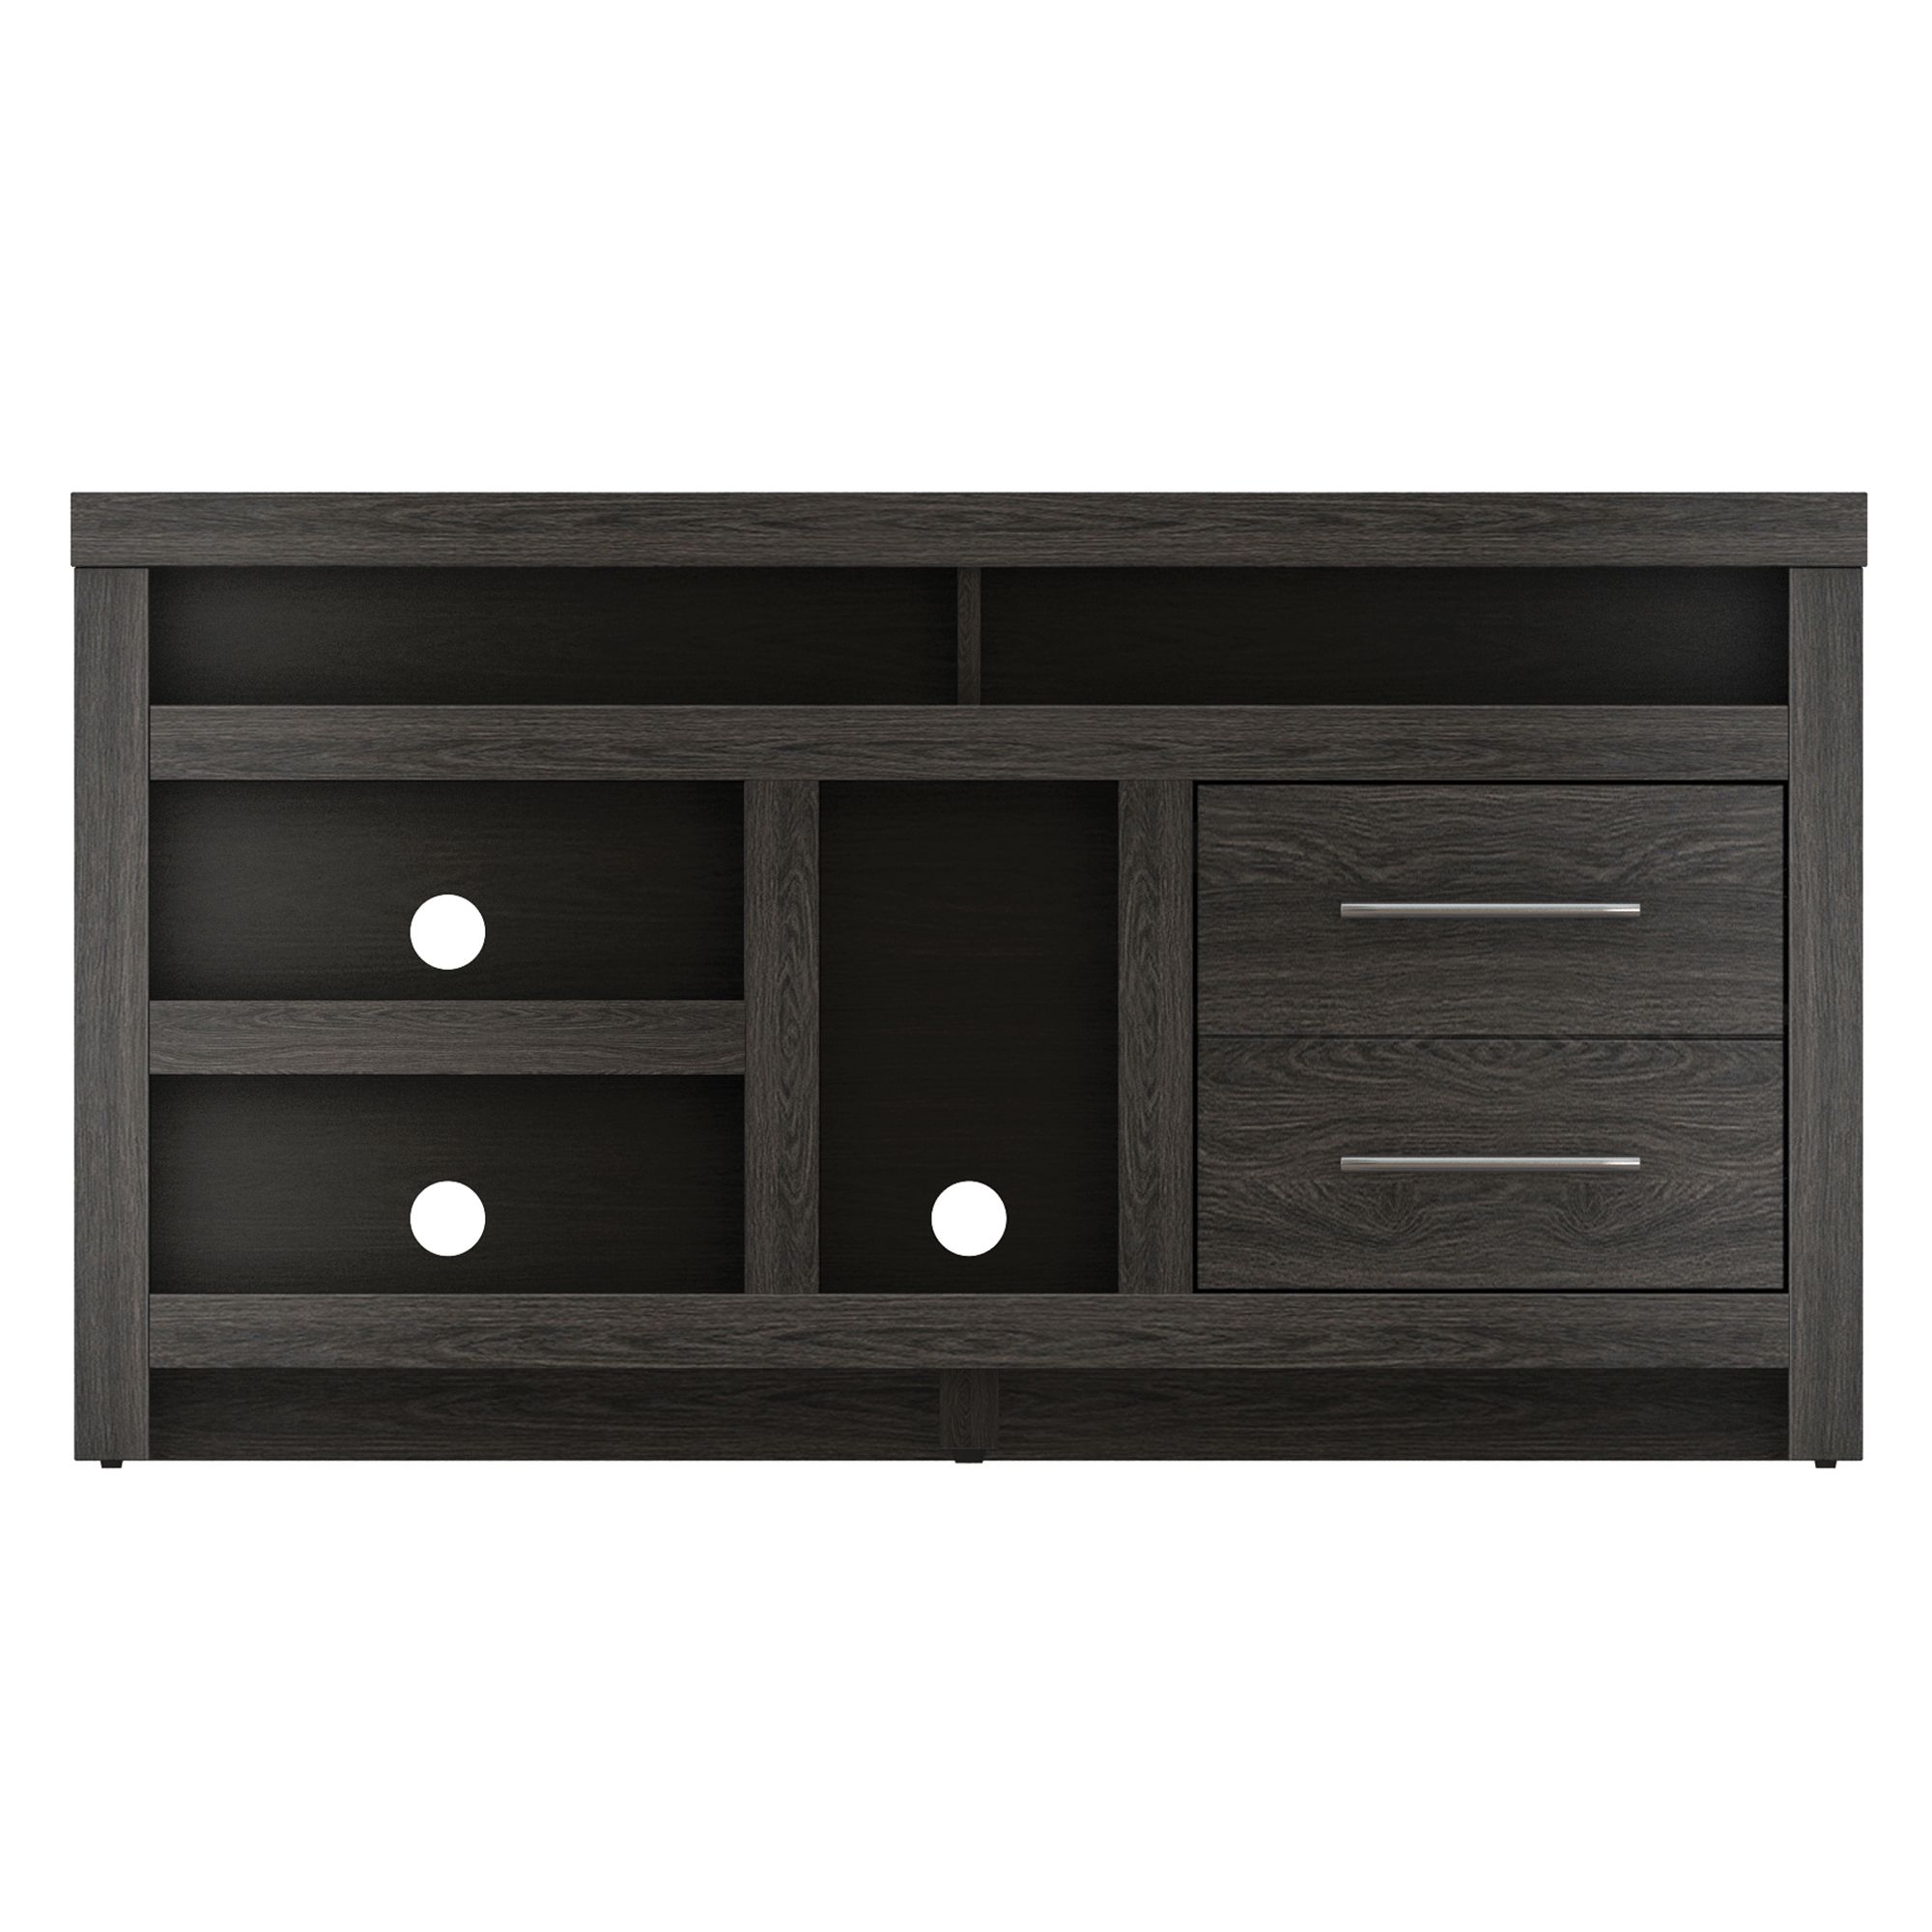 Twin Star Home Westside Black Walnut Tv Stand For Tvs Up Inside Upright Tv Stands (View 8 of 15)